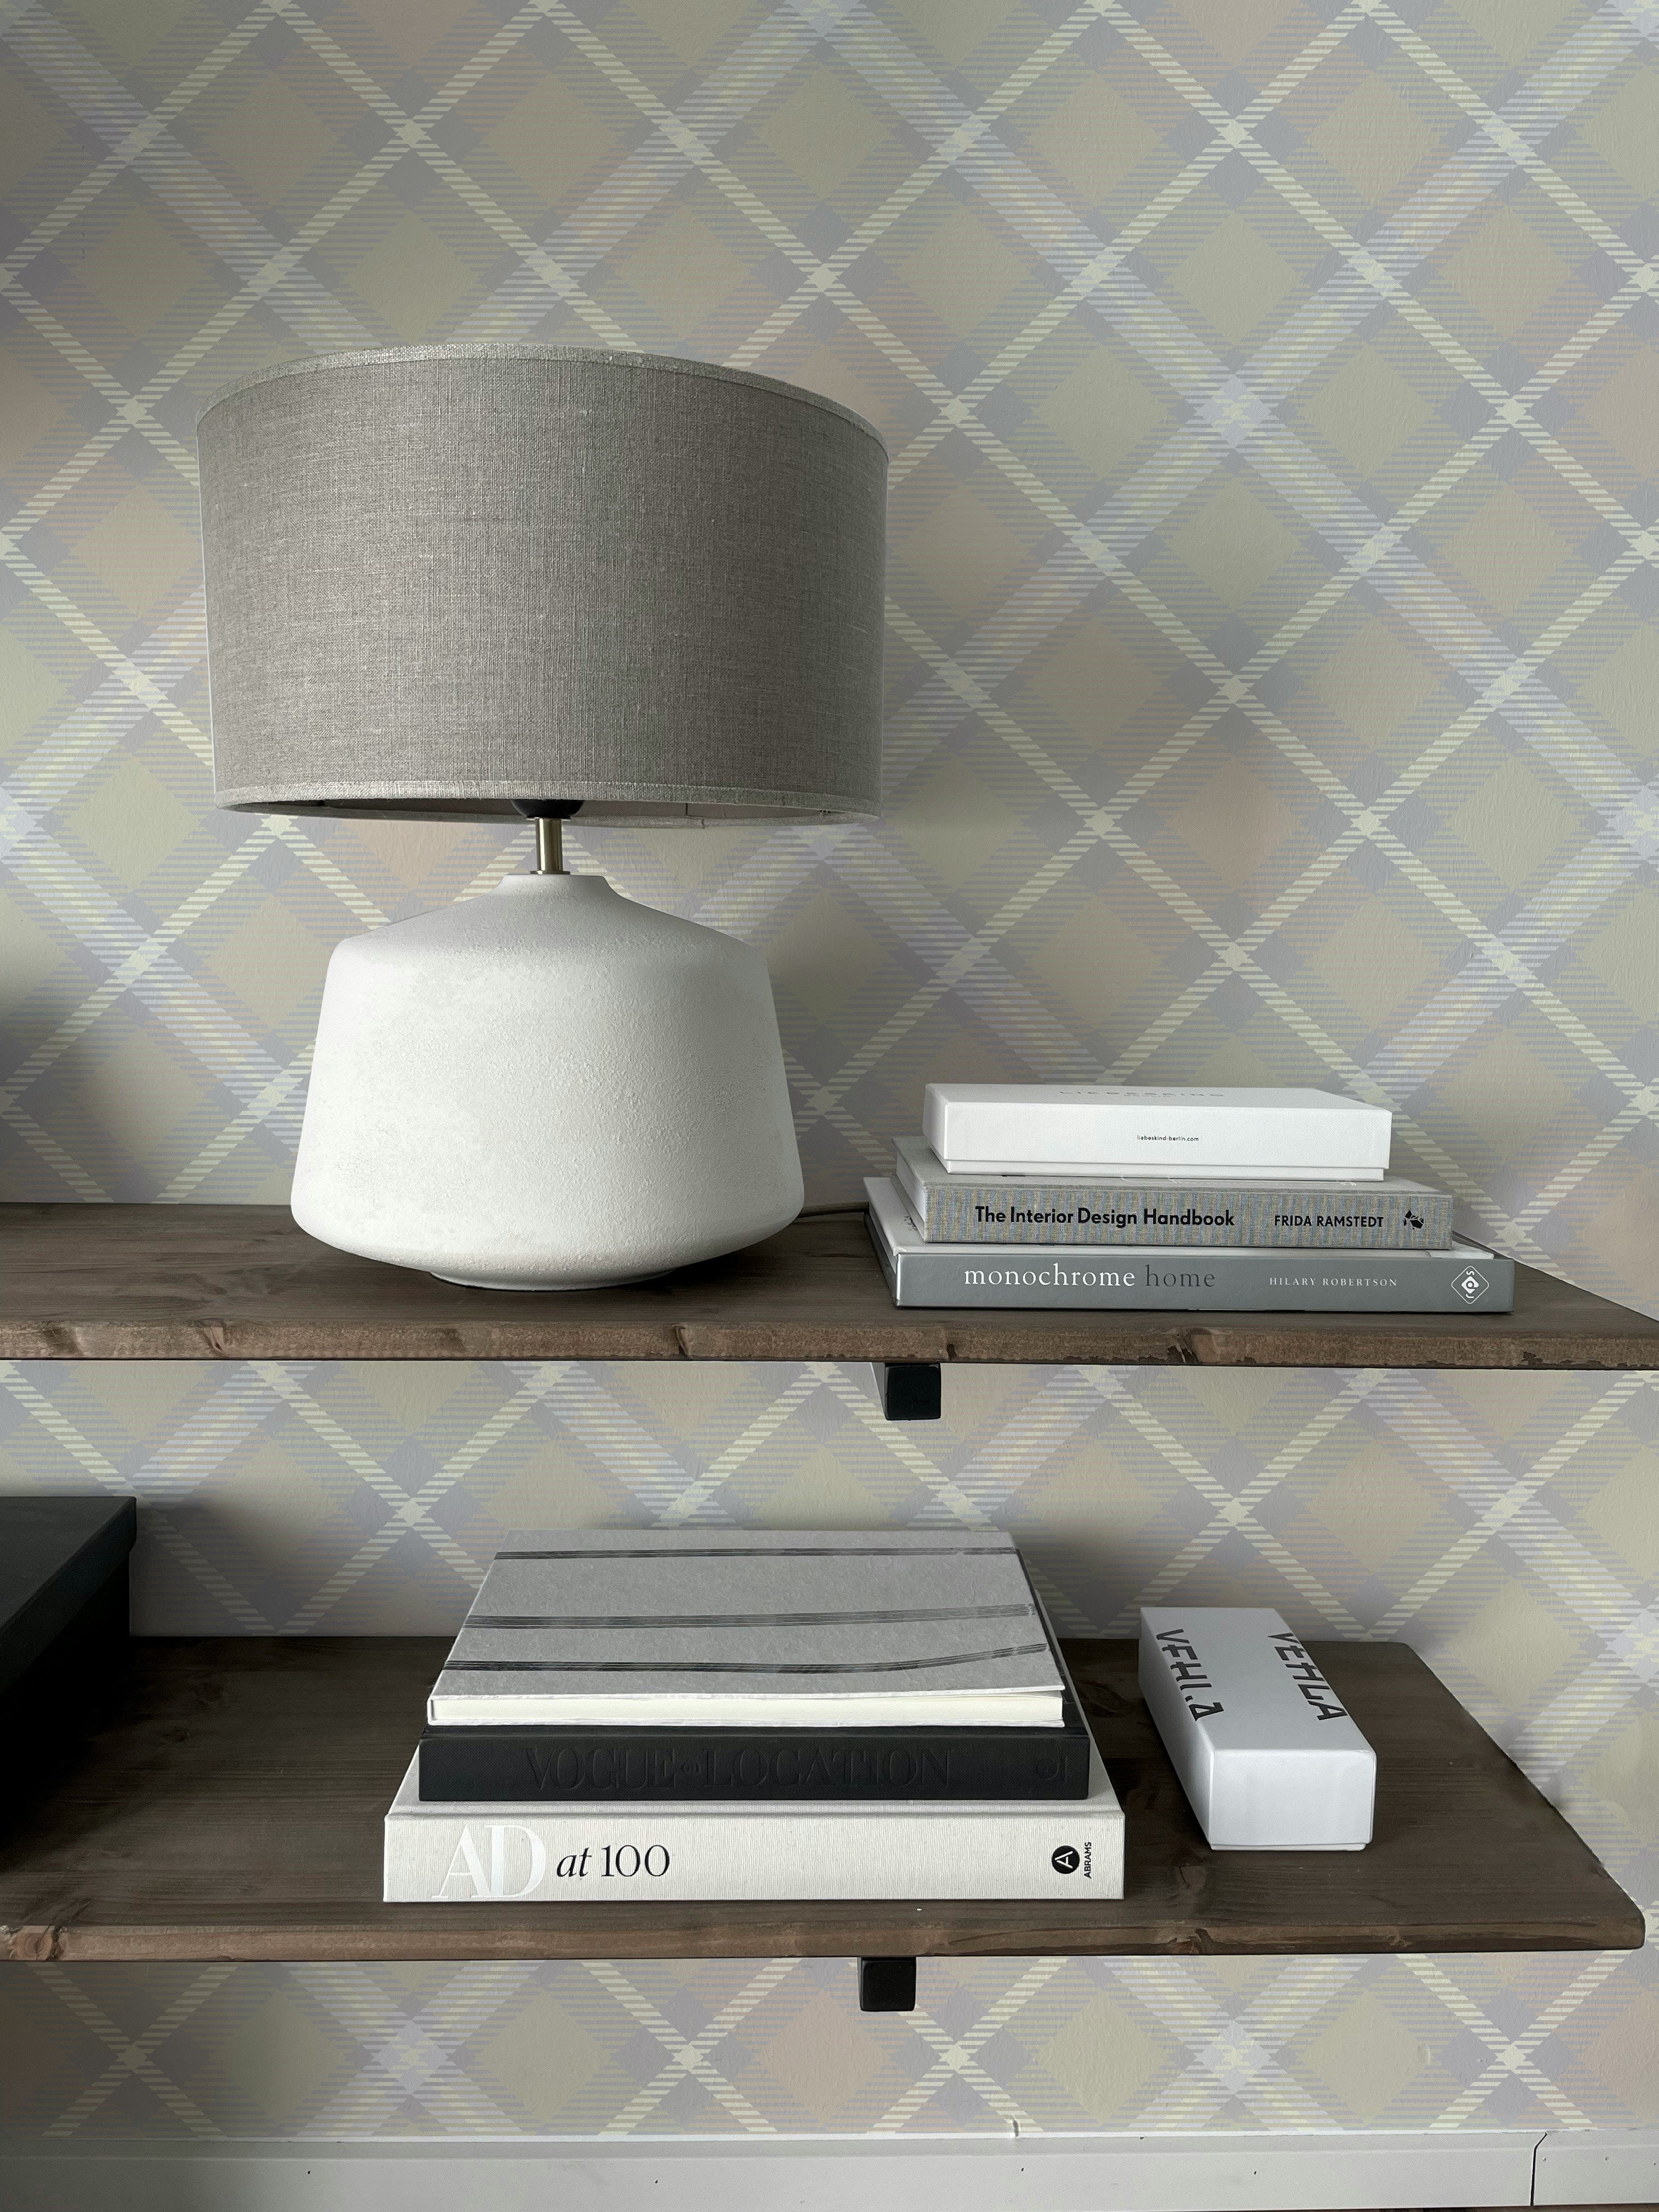 Tartan Plaid Wallpaper with a soft beige and gray crisscross pattern, providing a classic yet modern touch to the space. A minimalist lamp sits on a wooden shelf alongside neatly stacked books, enhancing the cozy and stylish ambiance of the room.